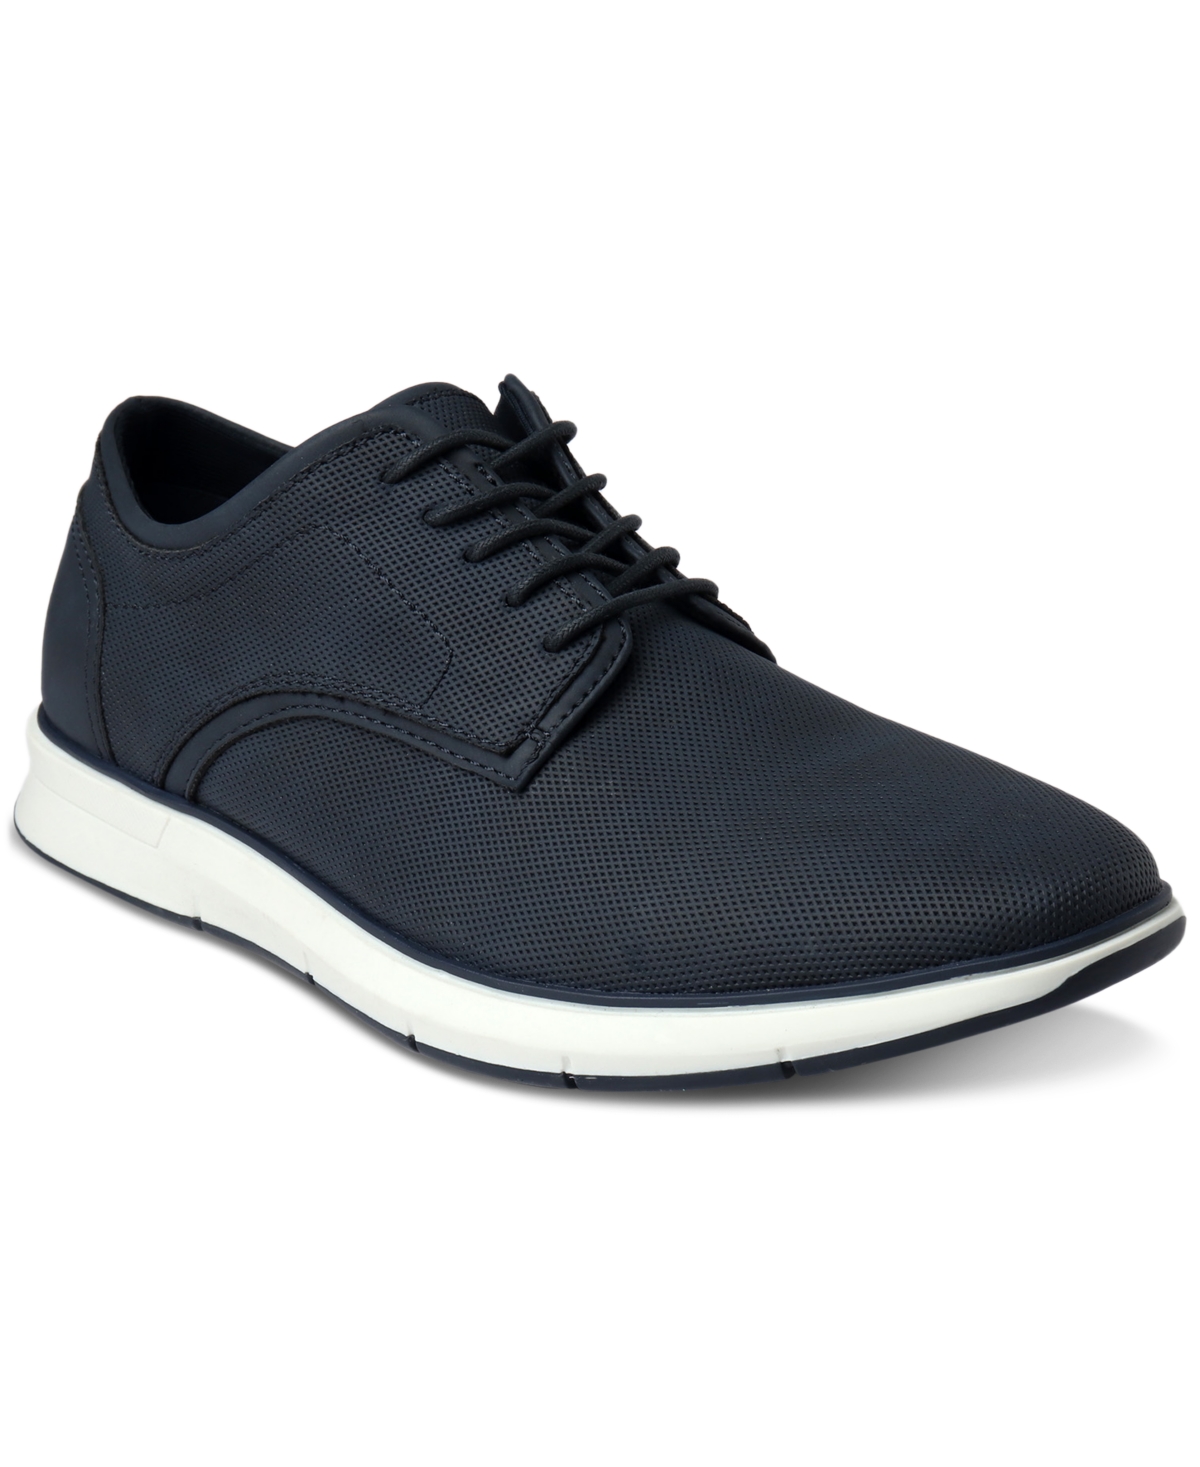 Men's Dalton Textured Faux-Leather Lace-Up Sneakers, Created for Macy's - Blue